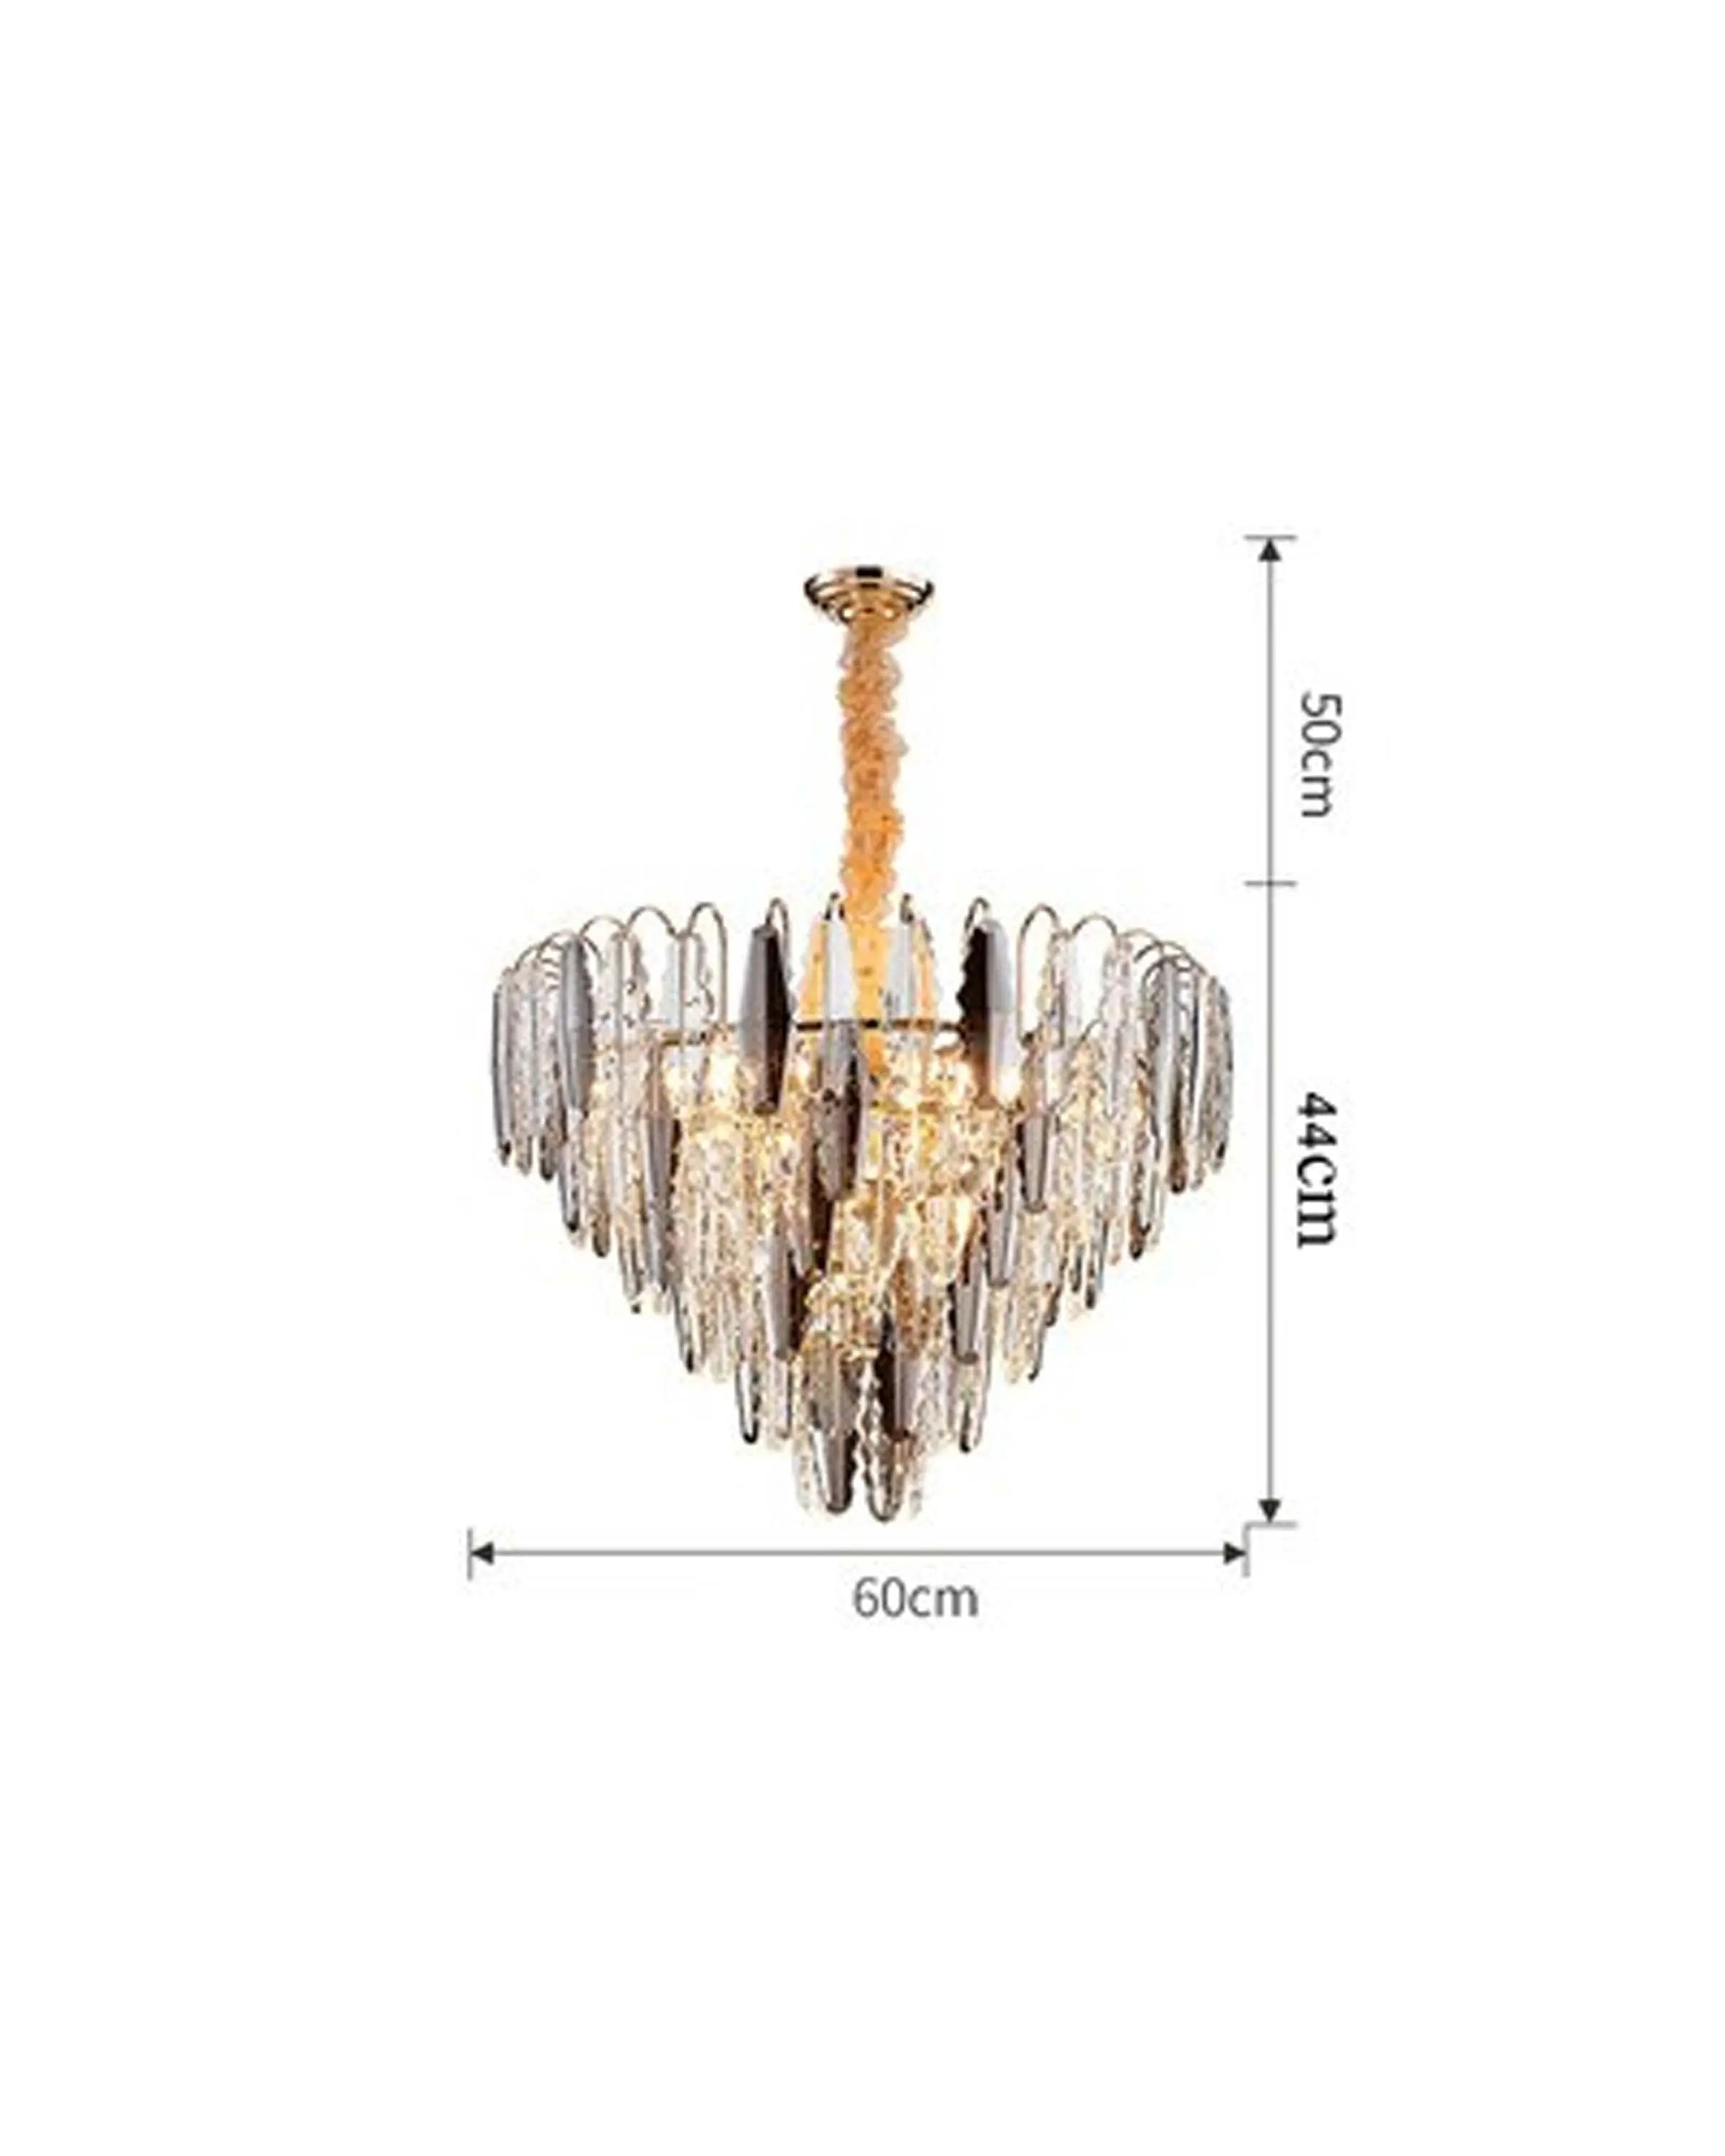 MATTERHORN Classic Crystal Chandelier ANGIE HOMES